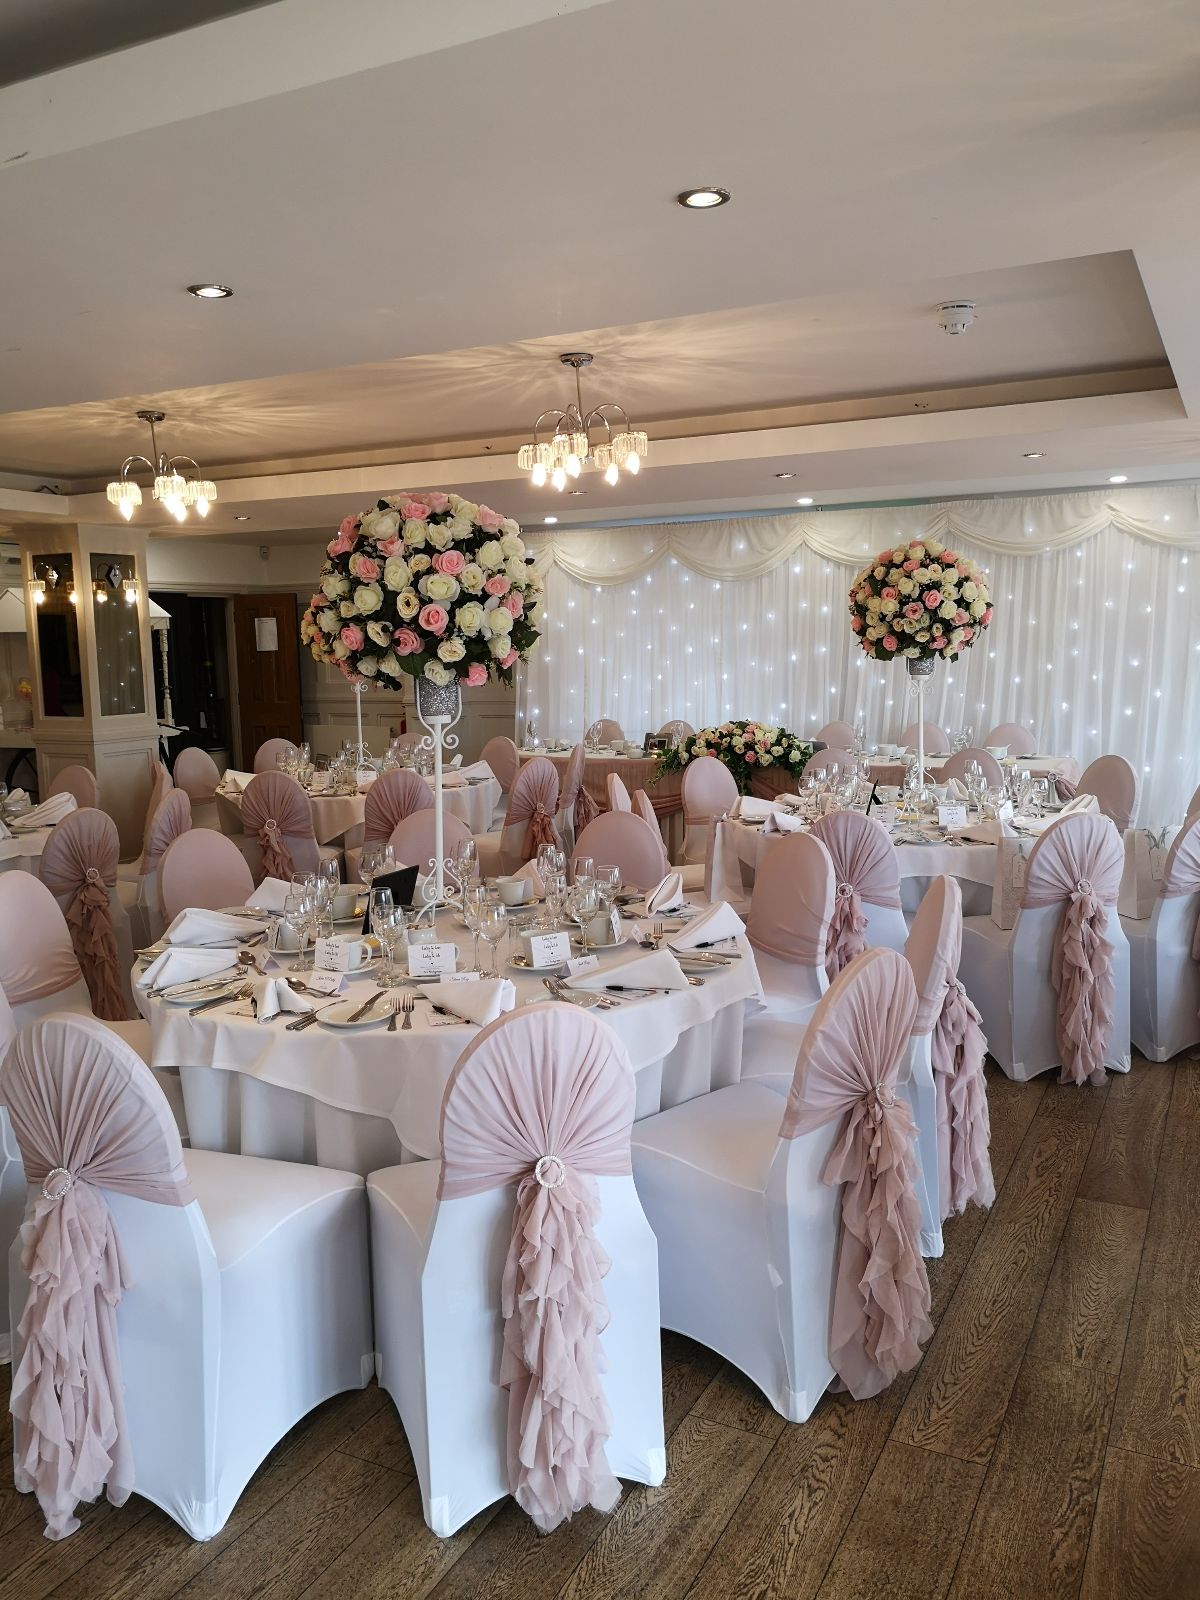 Gallery Item 90 for The Rayleigh Club Wedding and Golf Resort